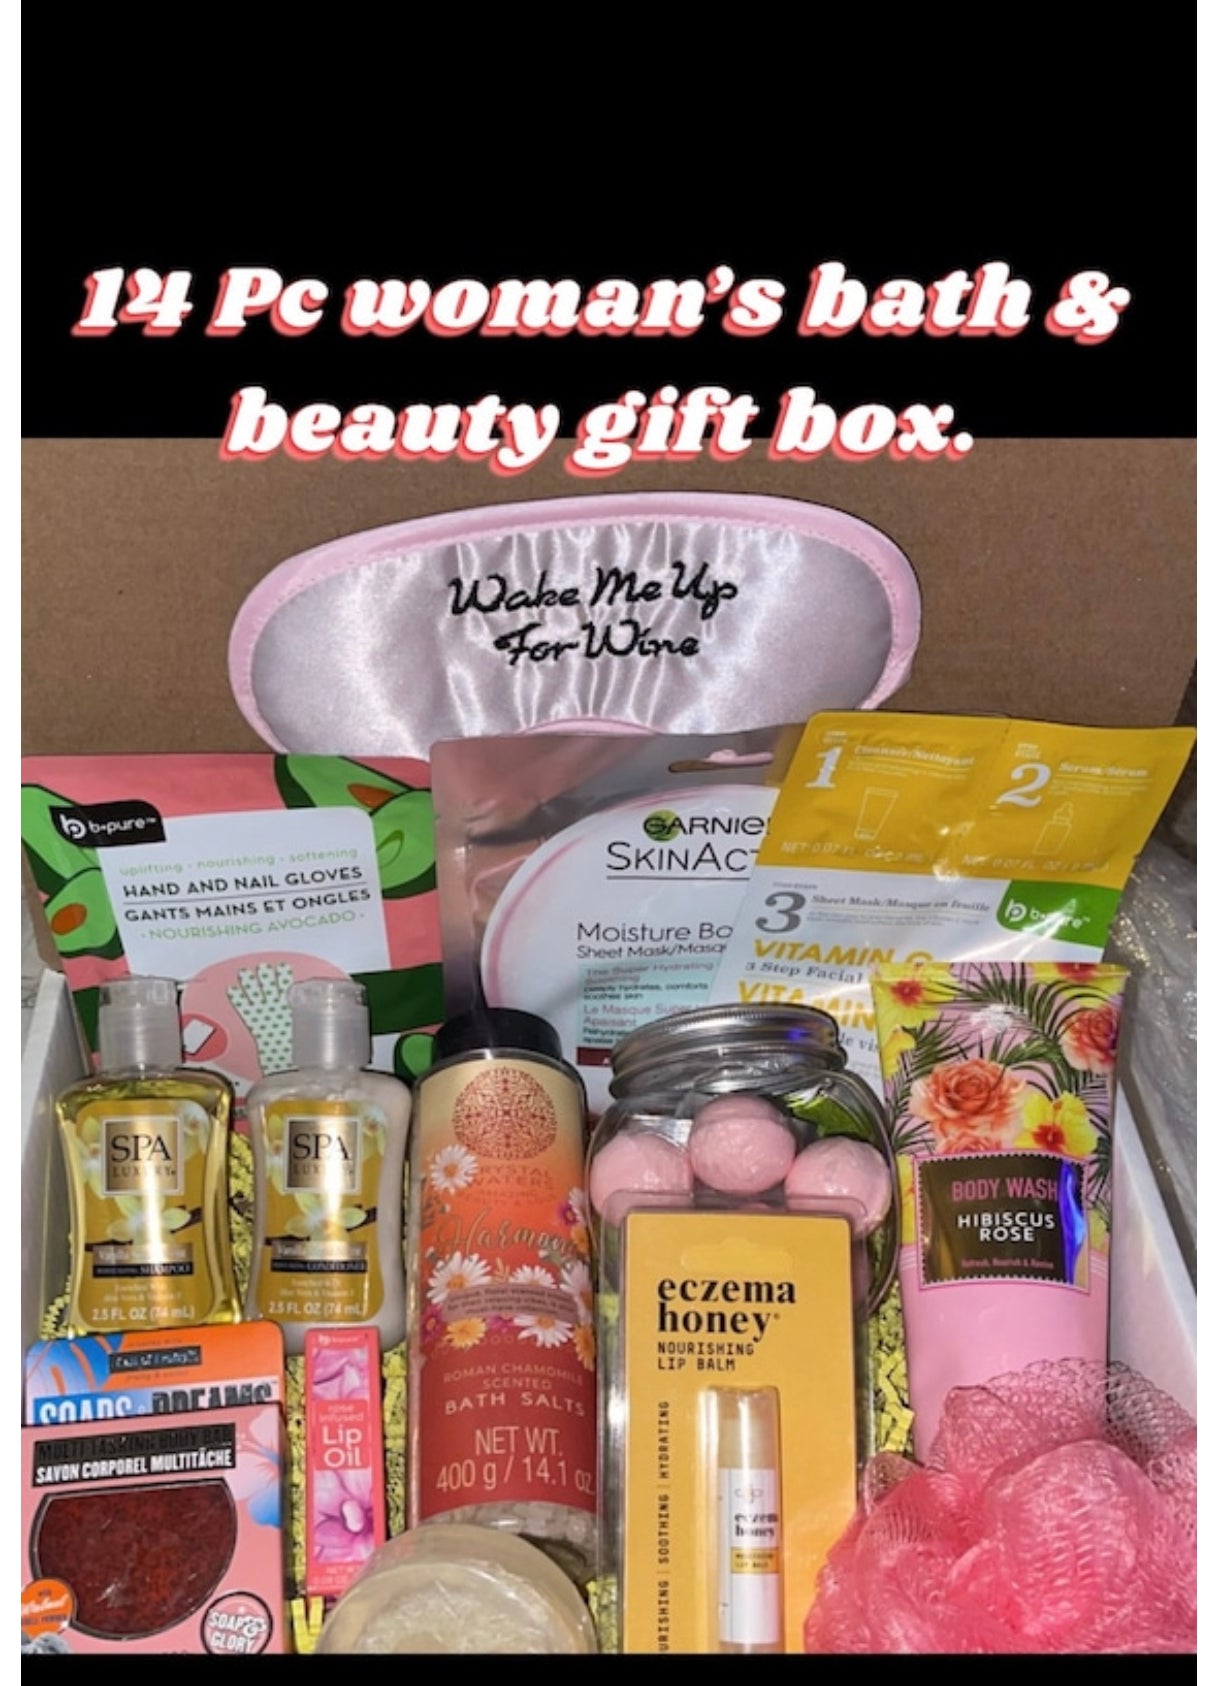 14 Pc Women’s body & bath spa gift set Box Valentine’s Day Birthday Shower Thinking Of You Get well.free shipping